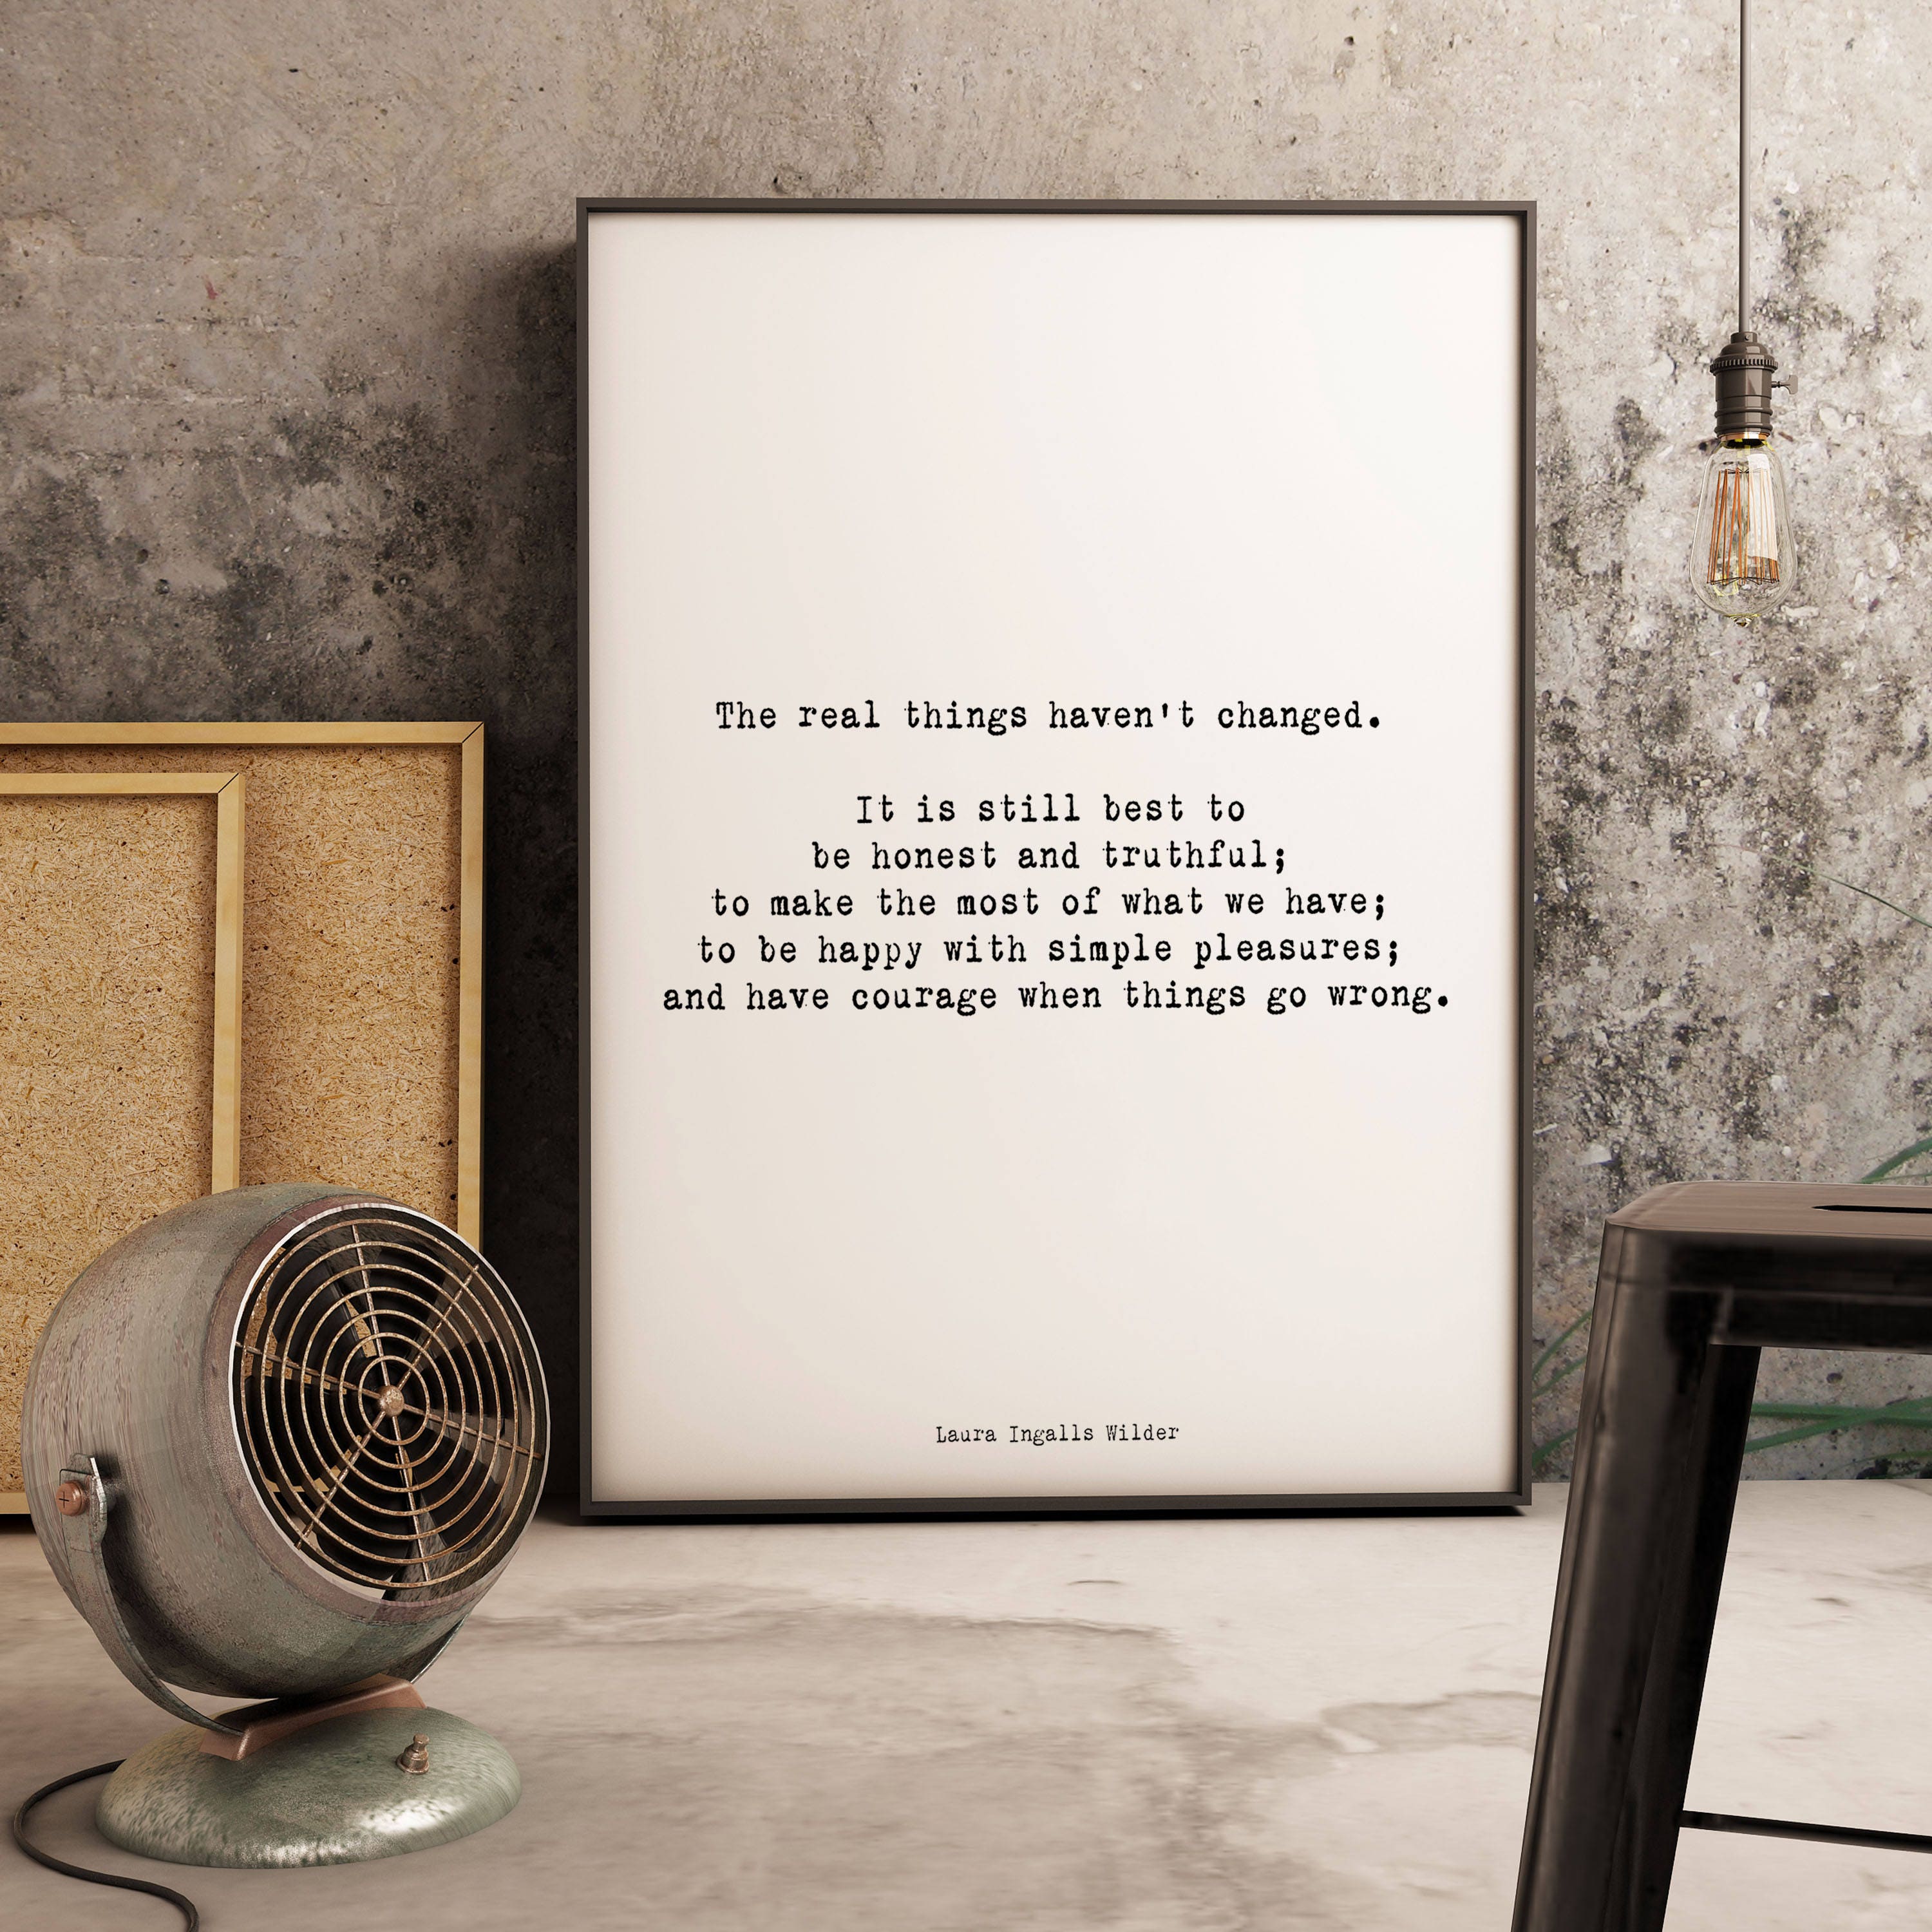 Laura Ingalls Wilder Inspirational Wall Art Quote Print, Typography Wall Decor